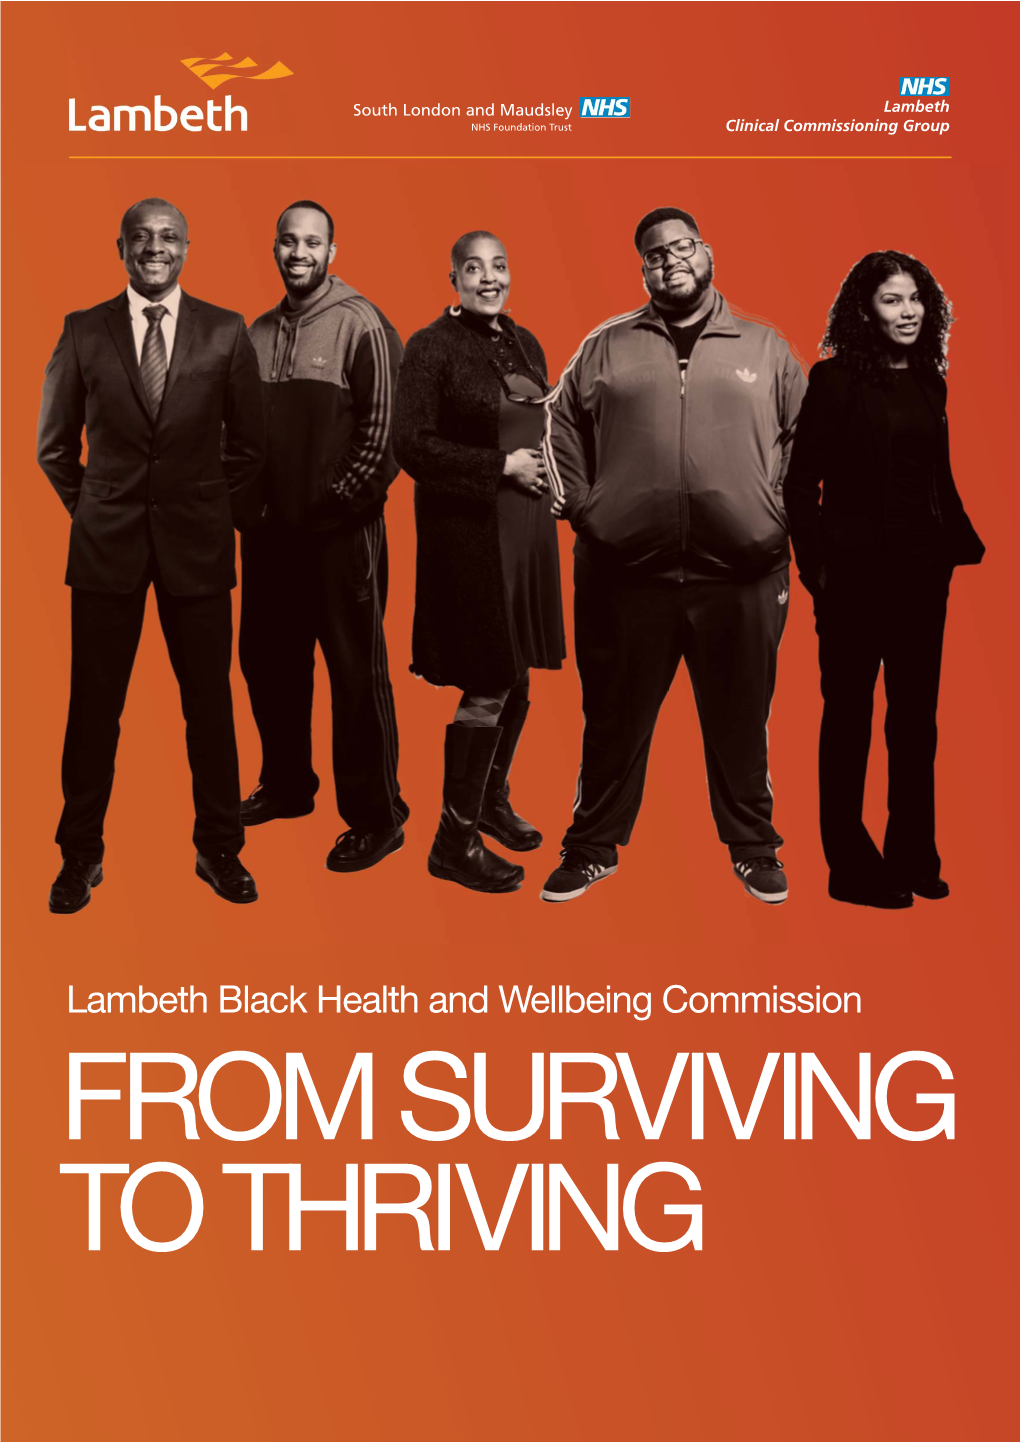 Lambeth Black Health and Wellbeing Commission from SURVIVING to THRIVING